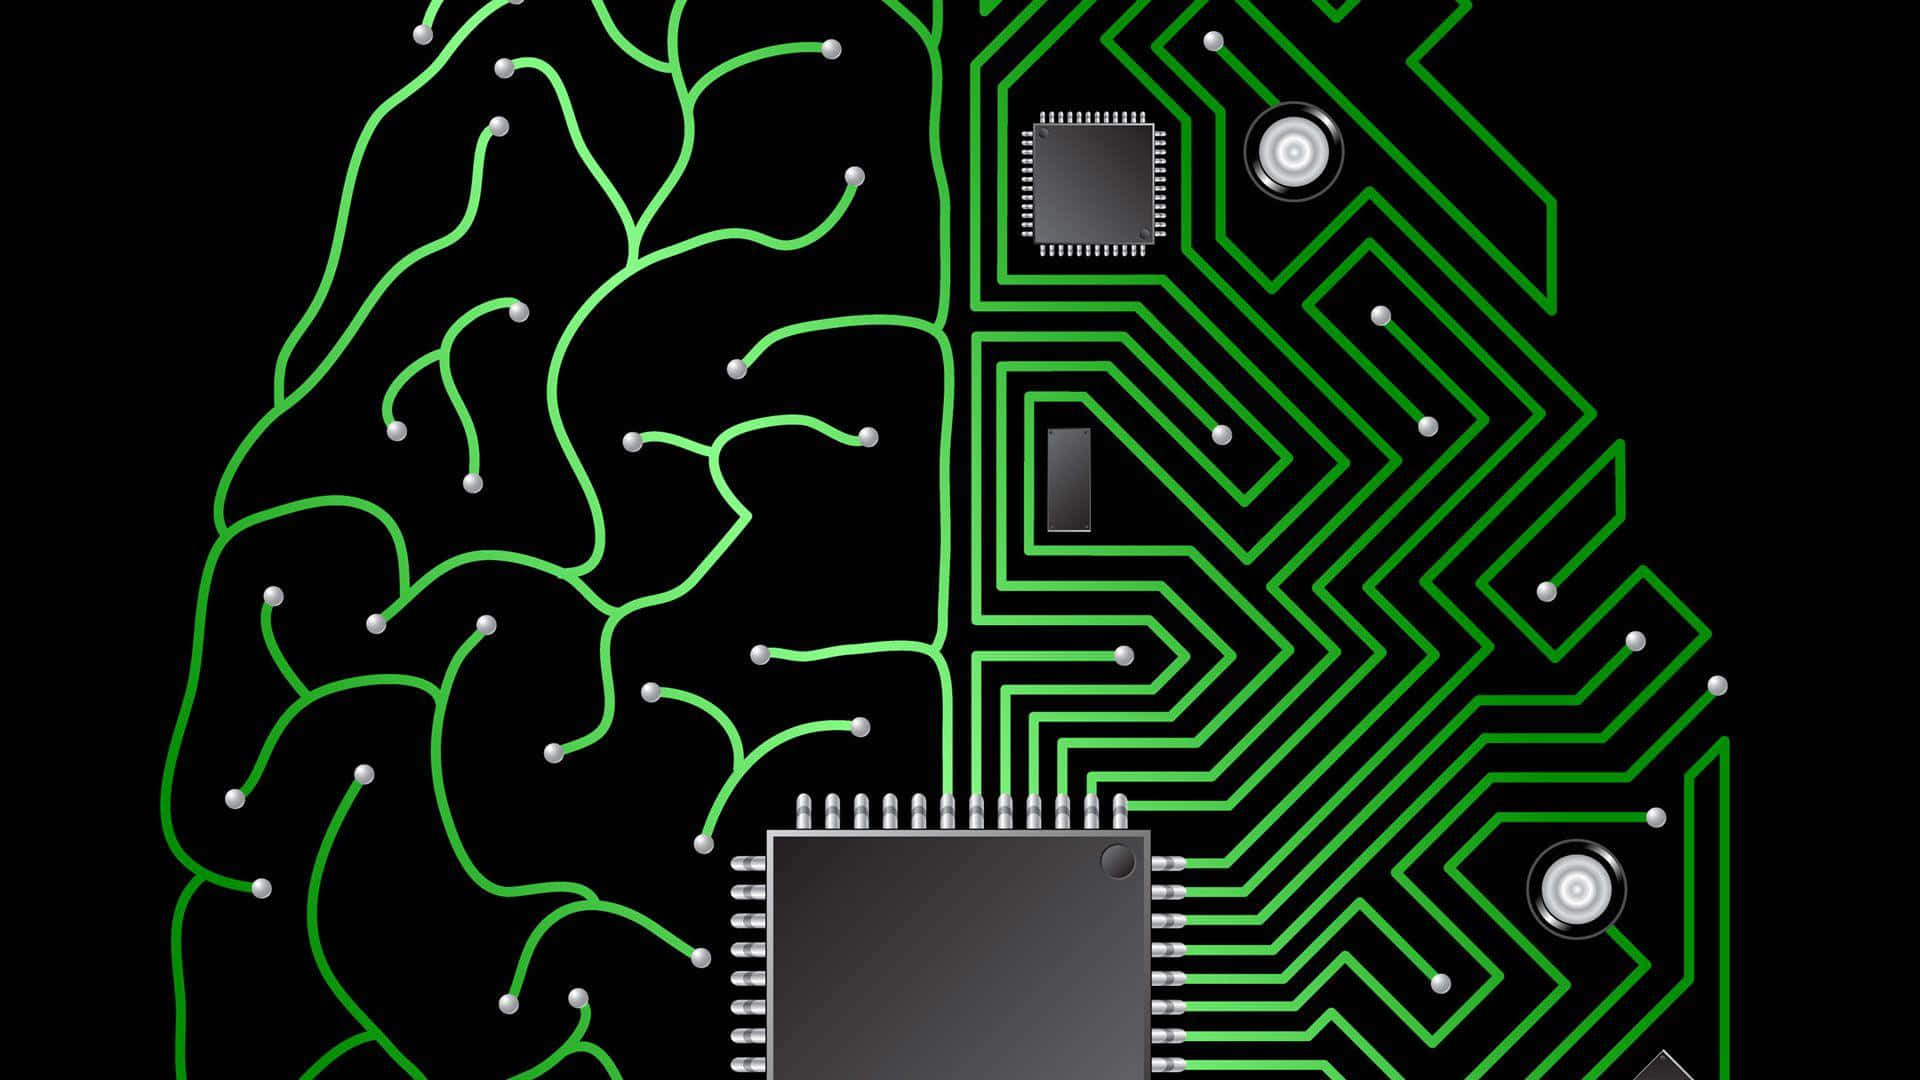 Abstract depiction of artificial intelligence Wallpaper